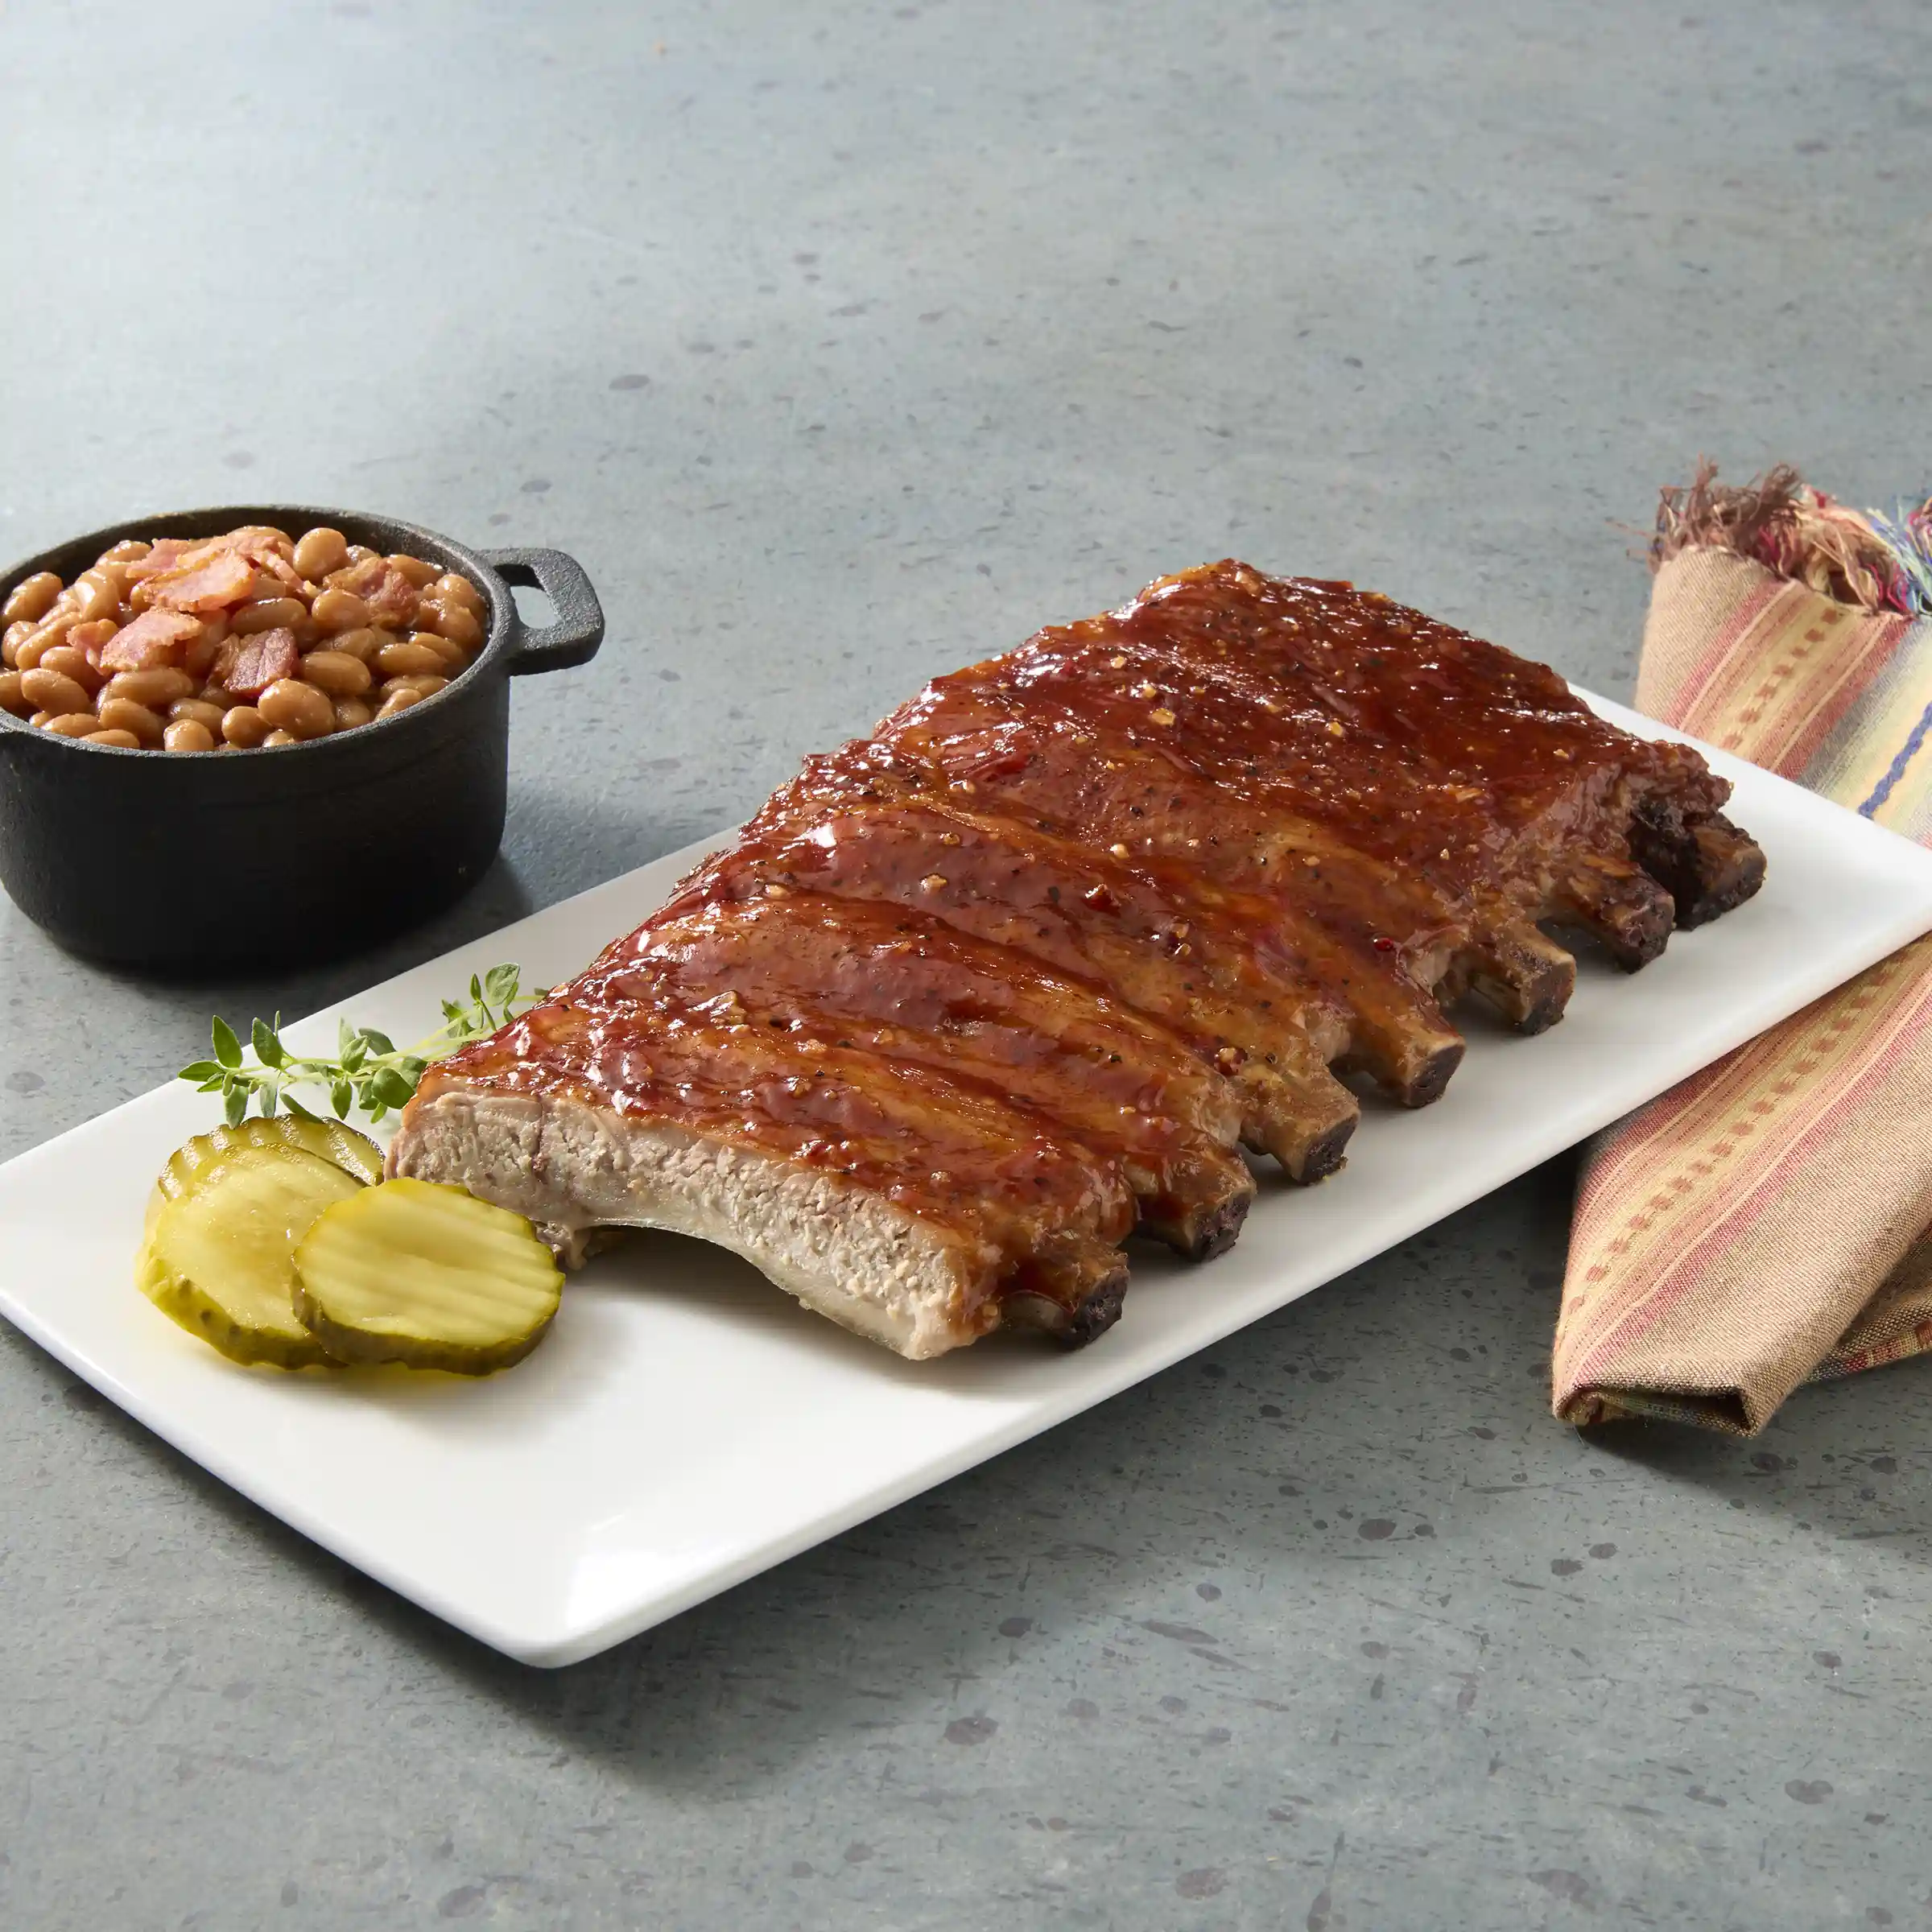 ibp Trusted Excellence® Brand St. Louis Style Ribs, 2.26 – 2.5 lbshttps://images.salsify.com/image/upload/s--sacuYxi7--/q_25/twmeklh5q5ckhukepzt7.webp